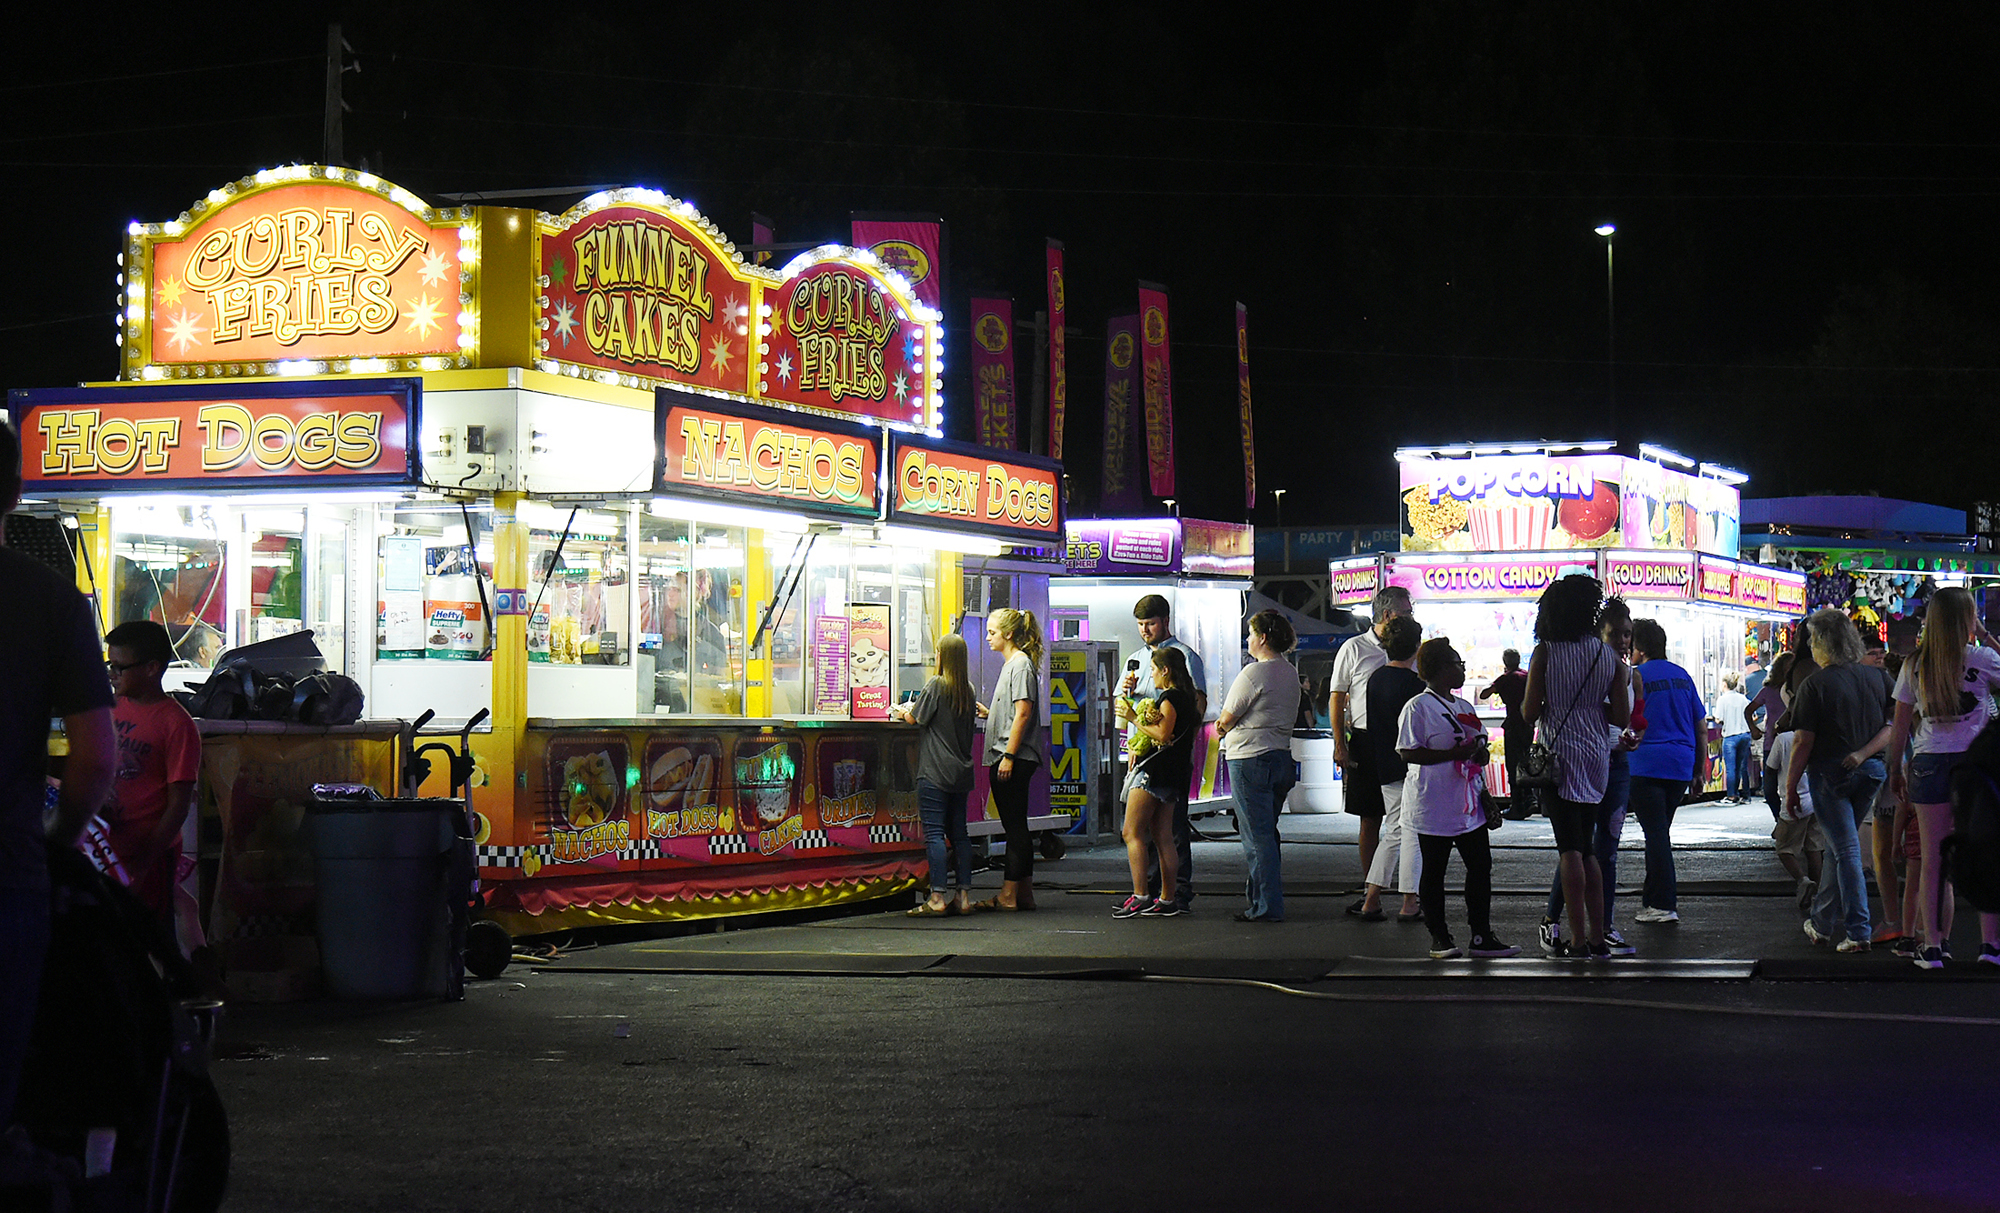 Alabama State Fair says no unsupervised minors after fight forced